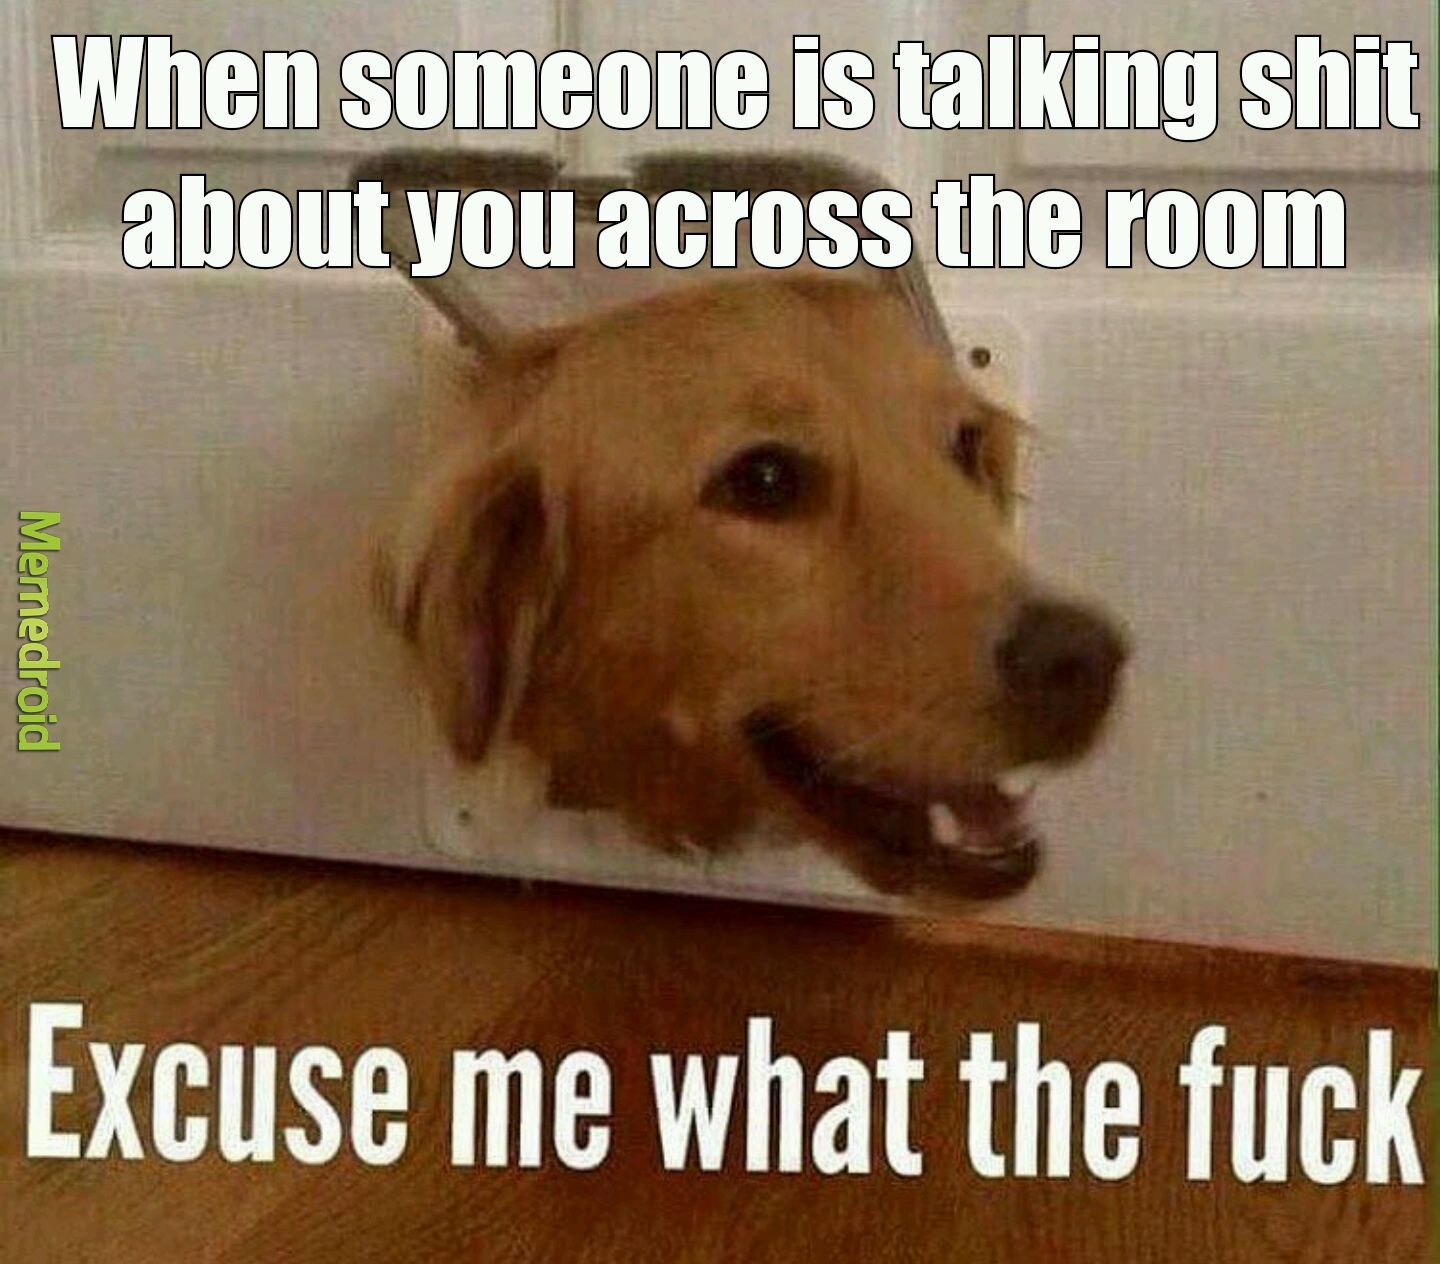 You are excused pupper - meme